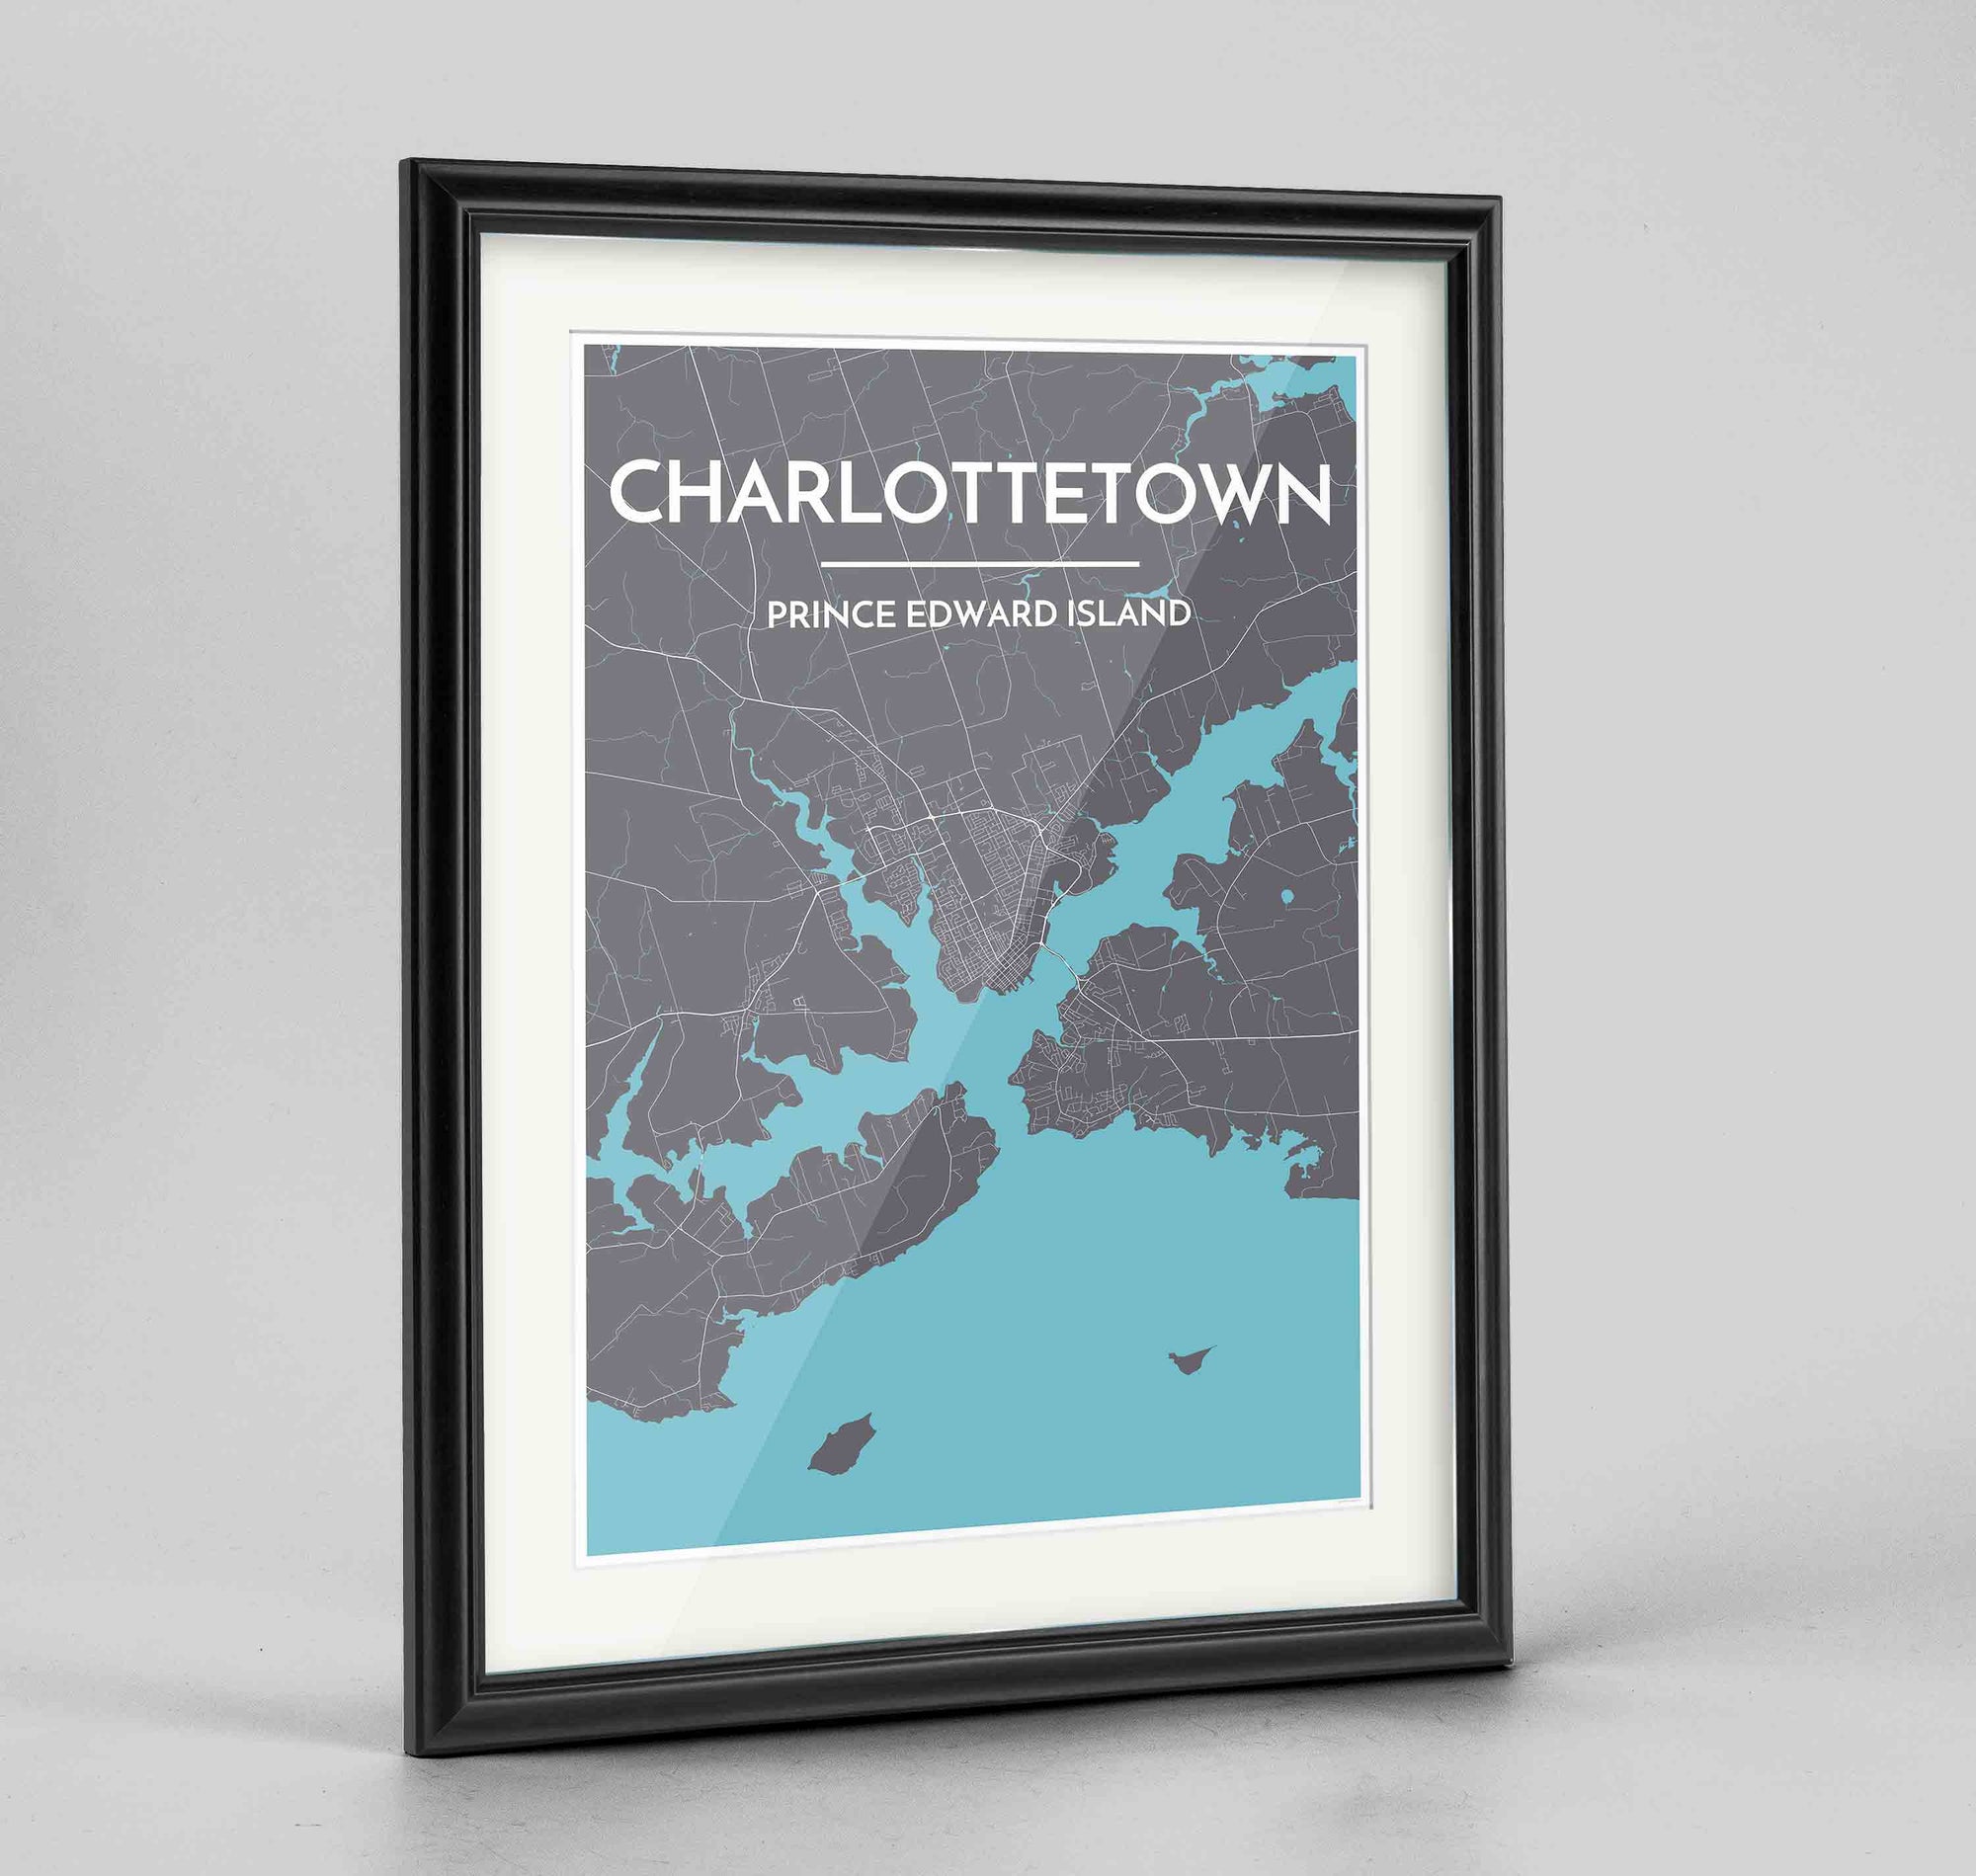 Framed Charlottetown City Map 24x36" Traditional Black frame Point Two Design Group